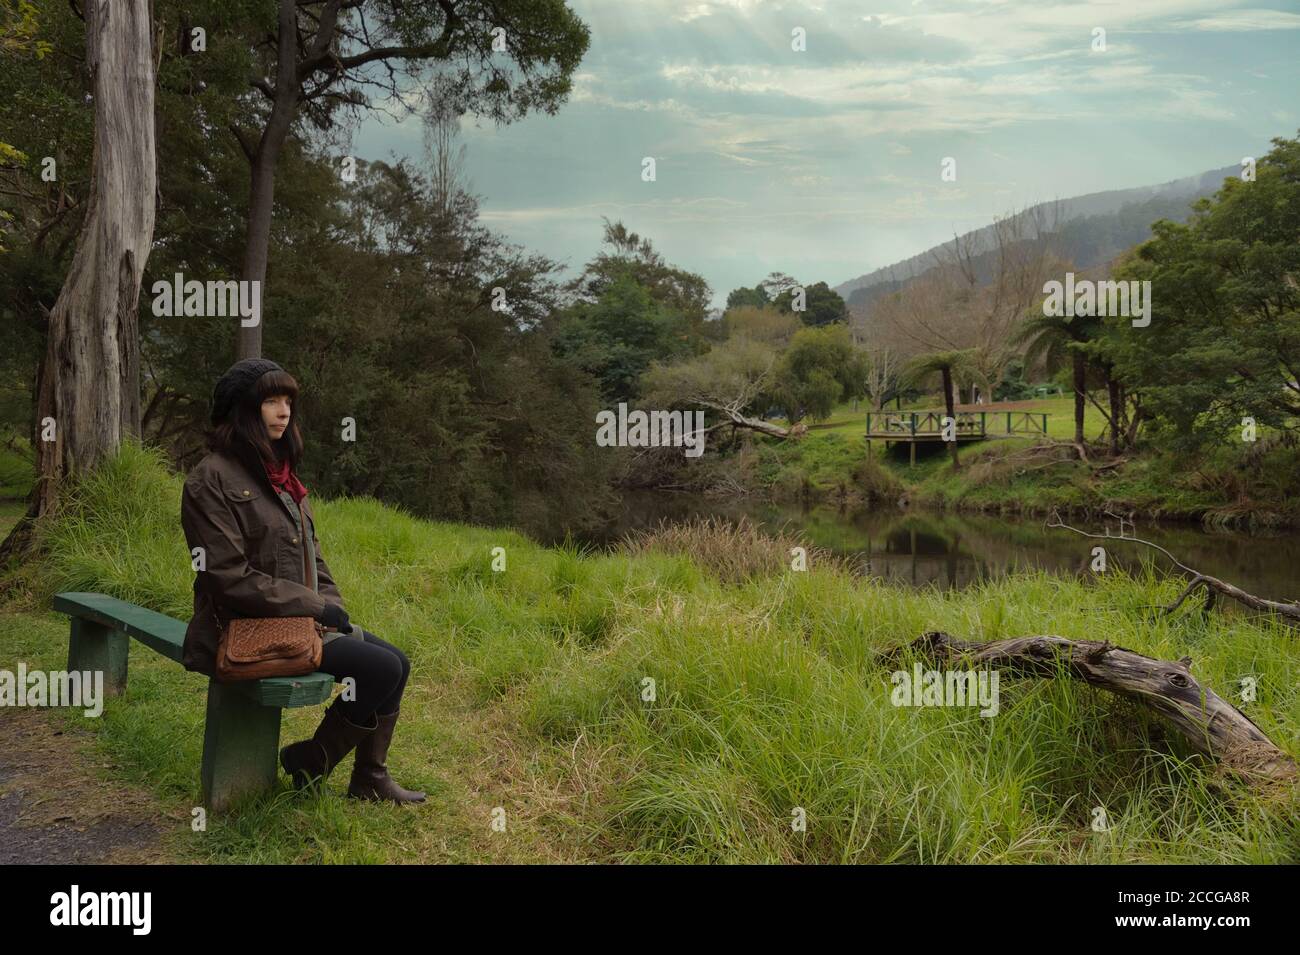 Tourist sitting on a bench on the banks of the youthful Yarra River in the upper reaches of the Yarra Valley in country Victoria in Australia. Stock Photo